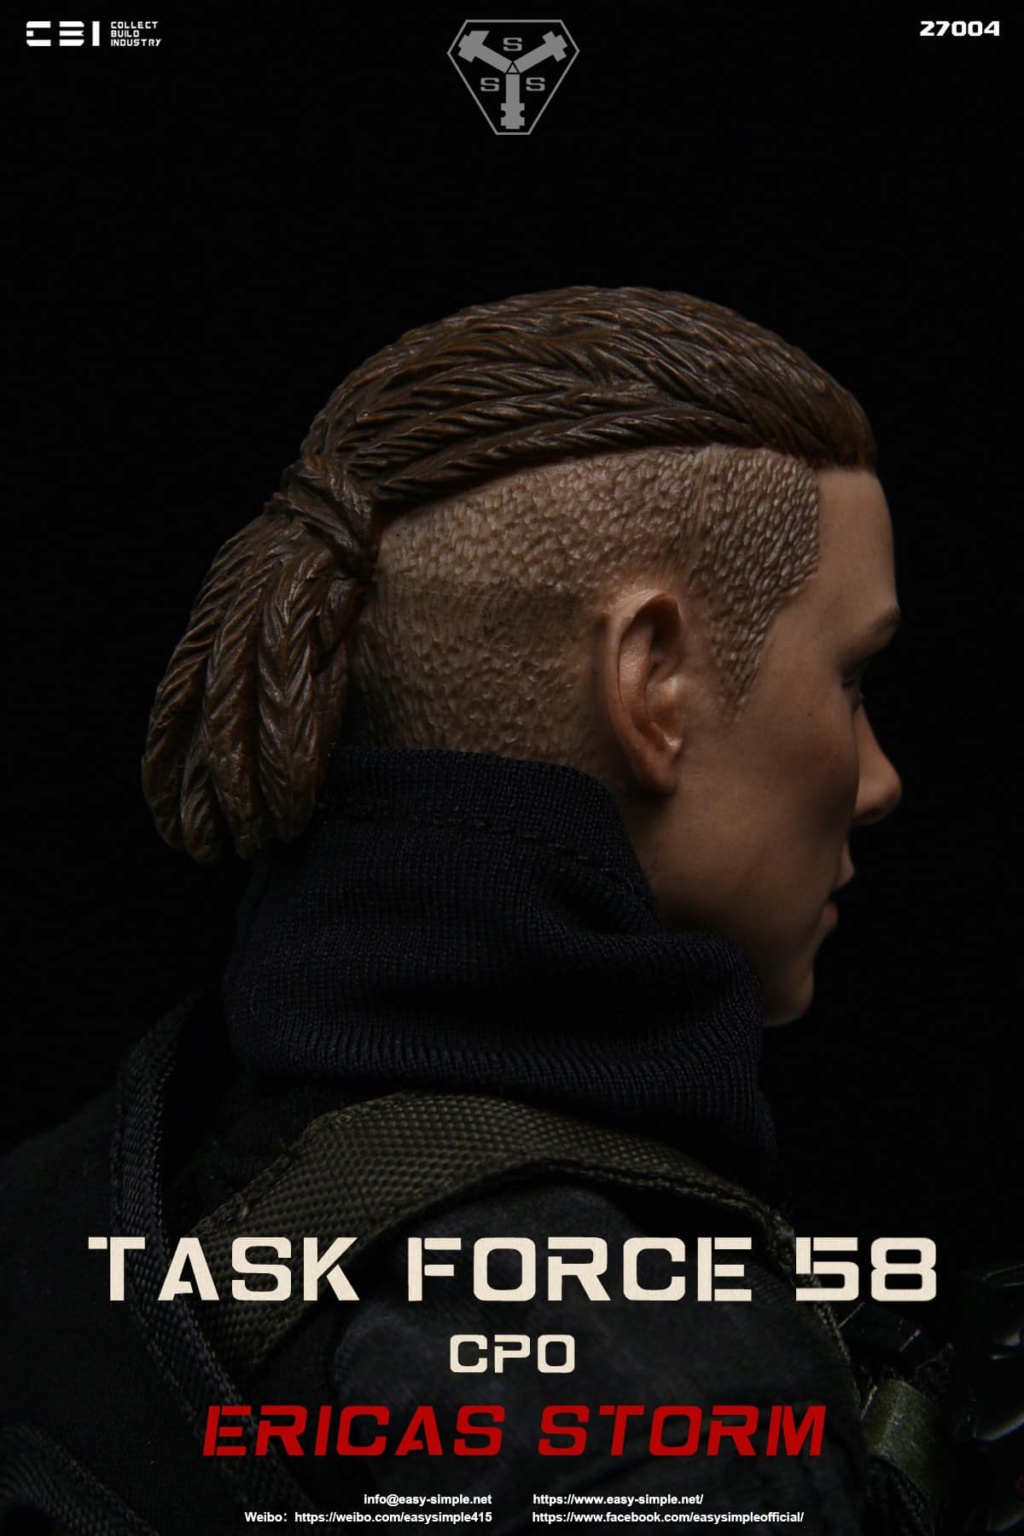 Female - NEW PRODUCT: CBI & Easy&Simple: 27004 1/6 ERICA STORM - TASK FORCE 58 CPO action figure 4731